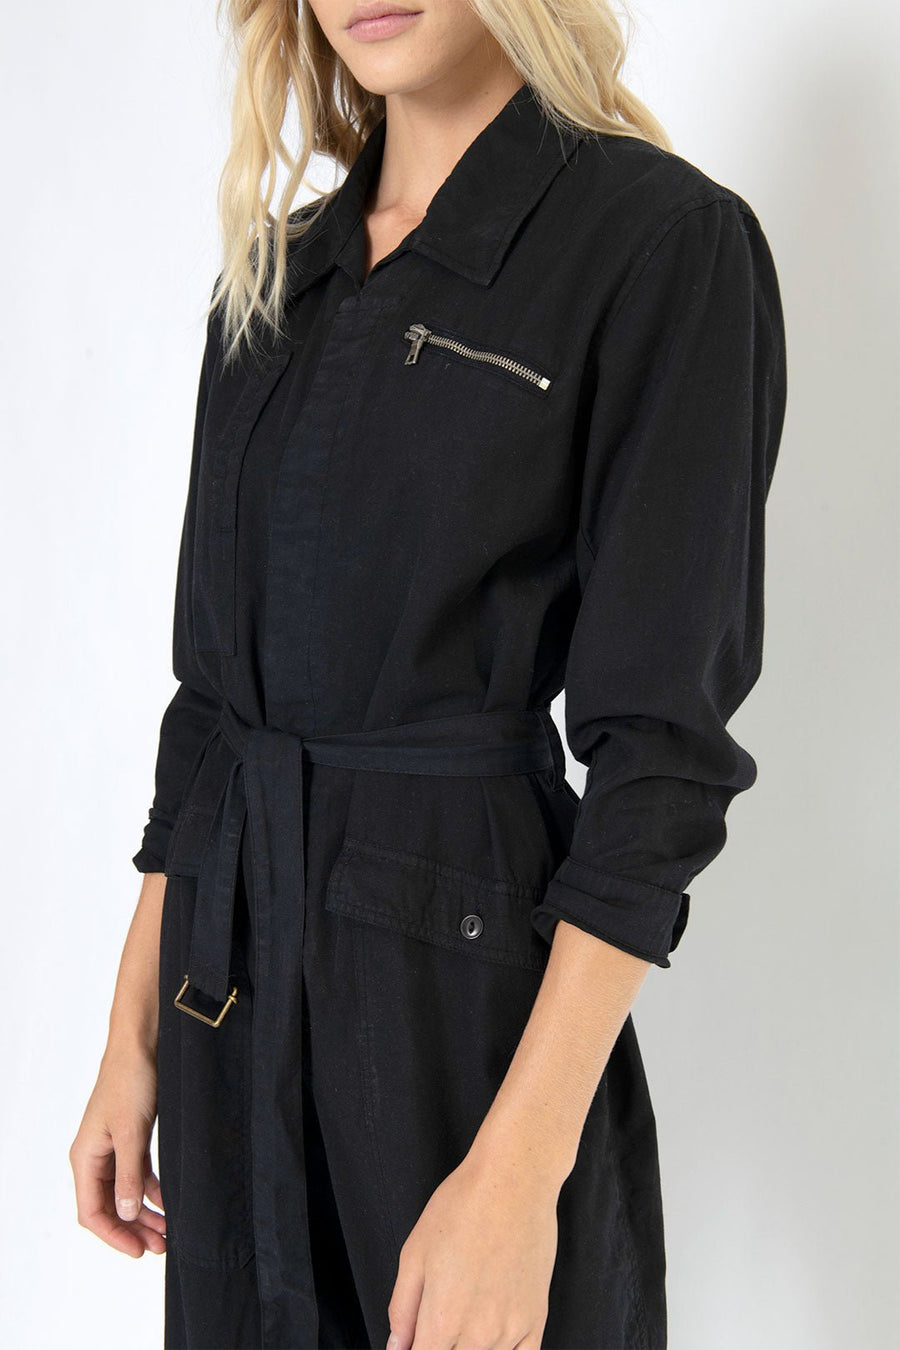 WORKWEAR COVERALL, BLACK - Burning Torch Online Boutique